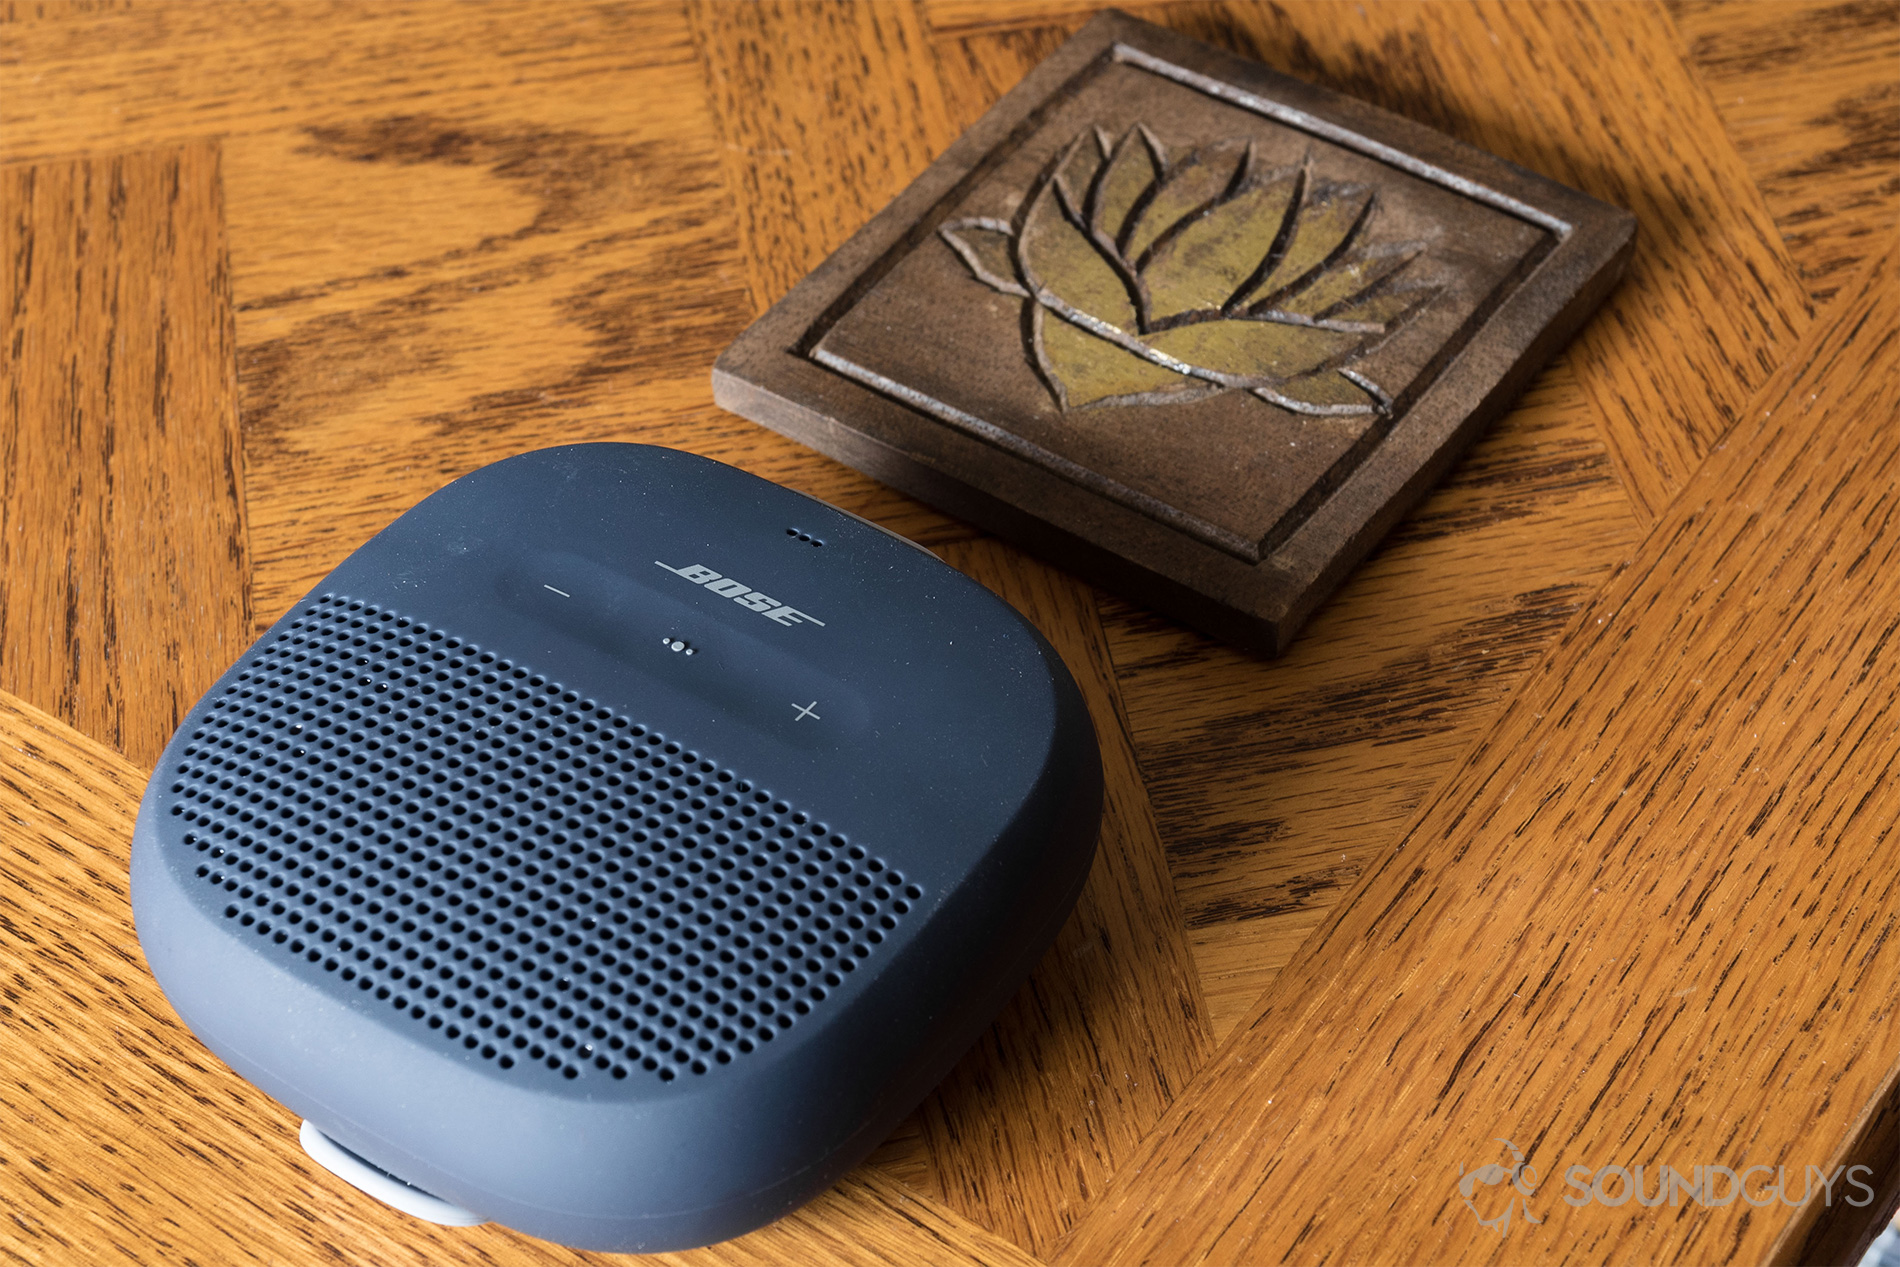 The Bose SoundLink Micro (blue) under a coster for scale.